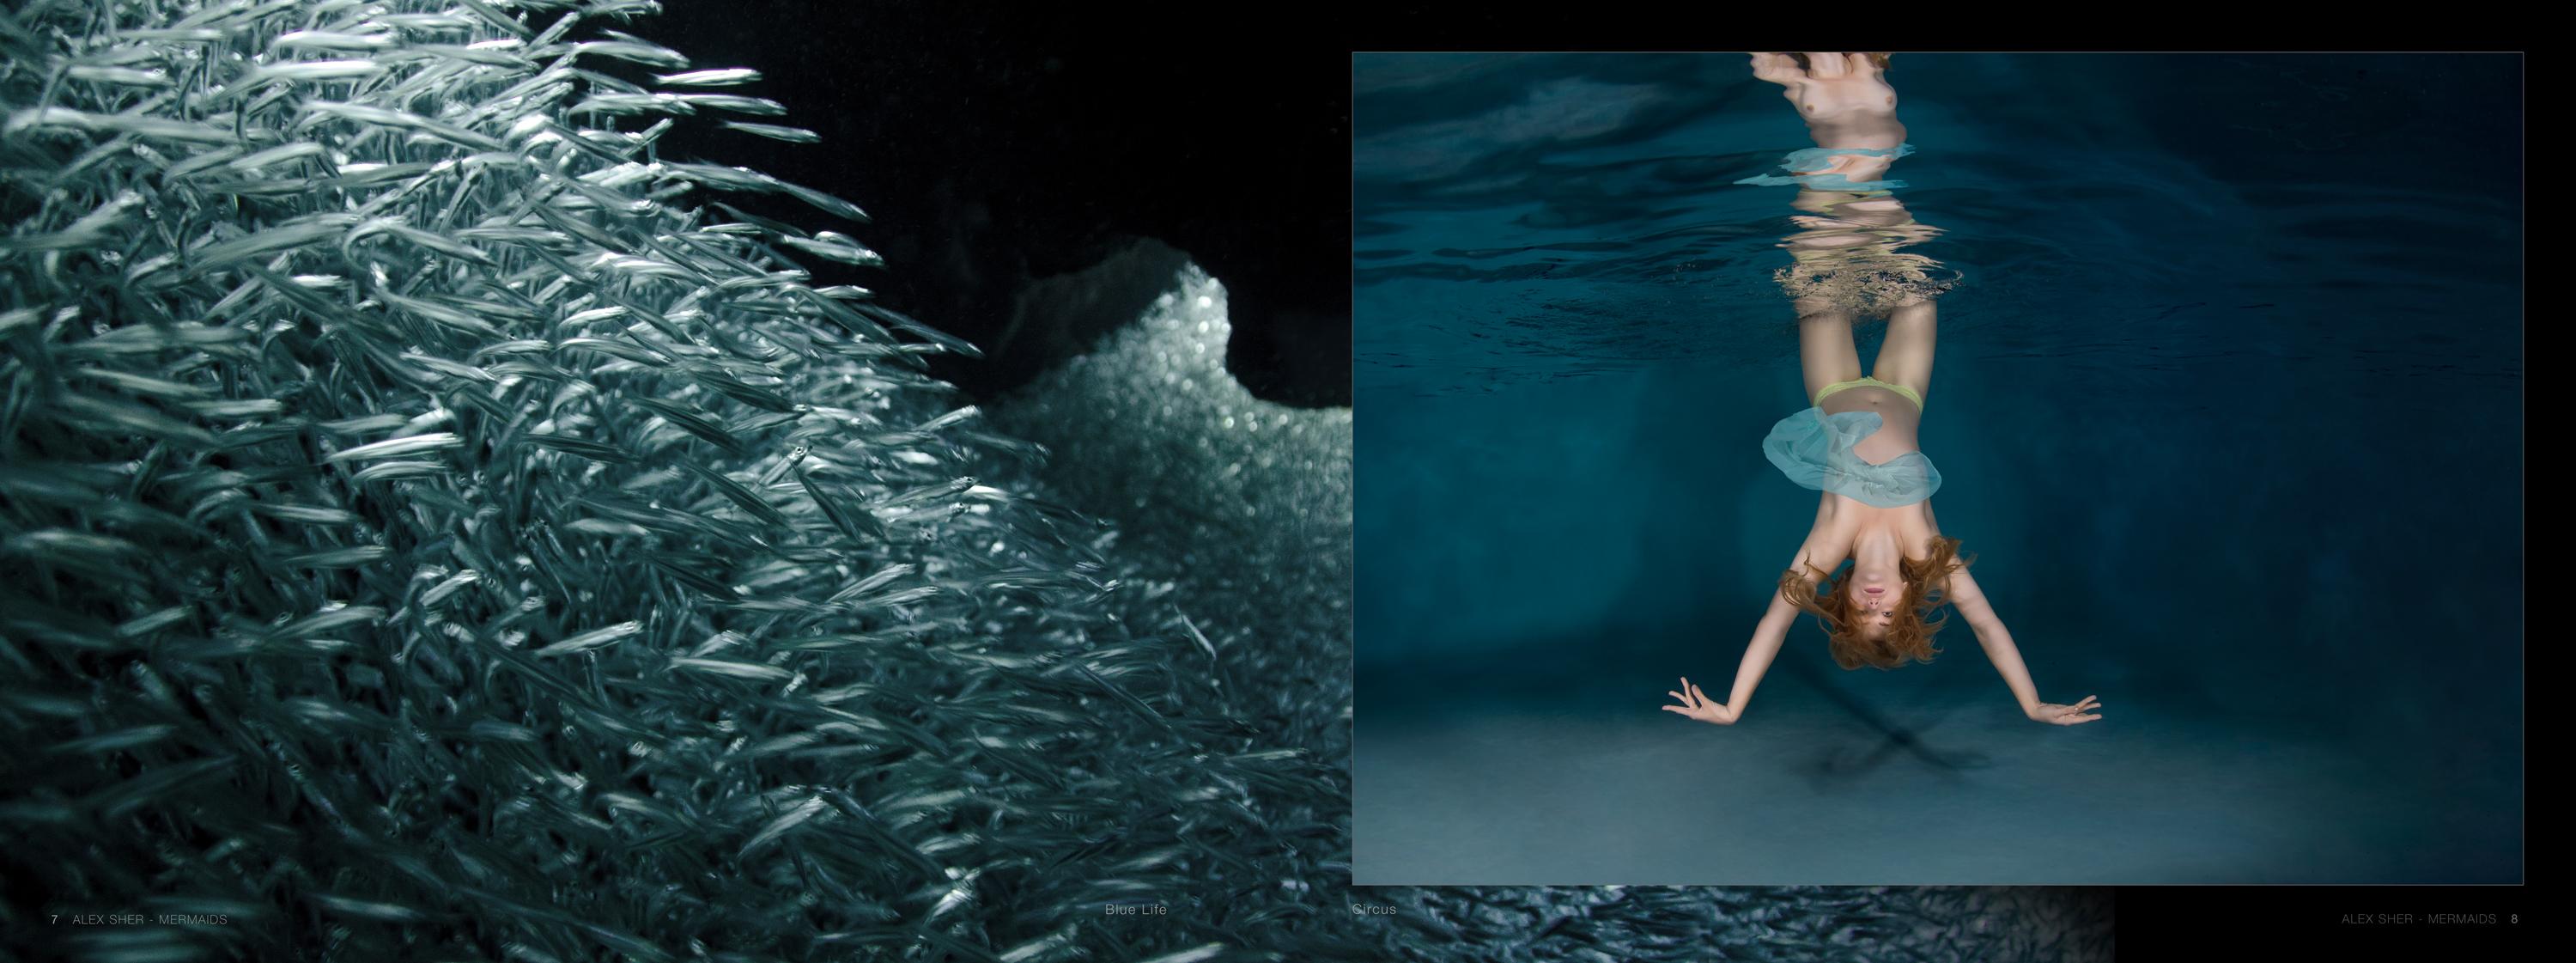 The book “Mermaids” has the best of Alex Sher’s underwater photography for eight years (2010-2017). It blends human erotics with the beauty of the ocean wildlife - transforming the concept of erotic photography into celebration of the almighty